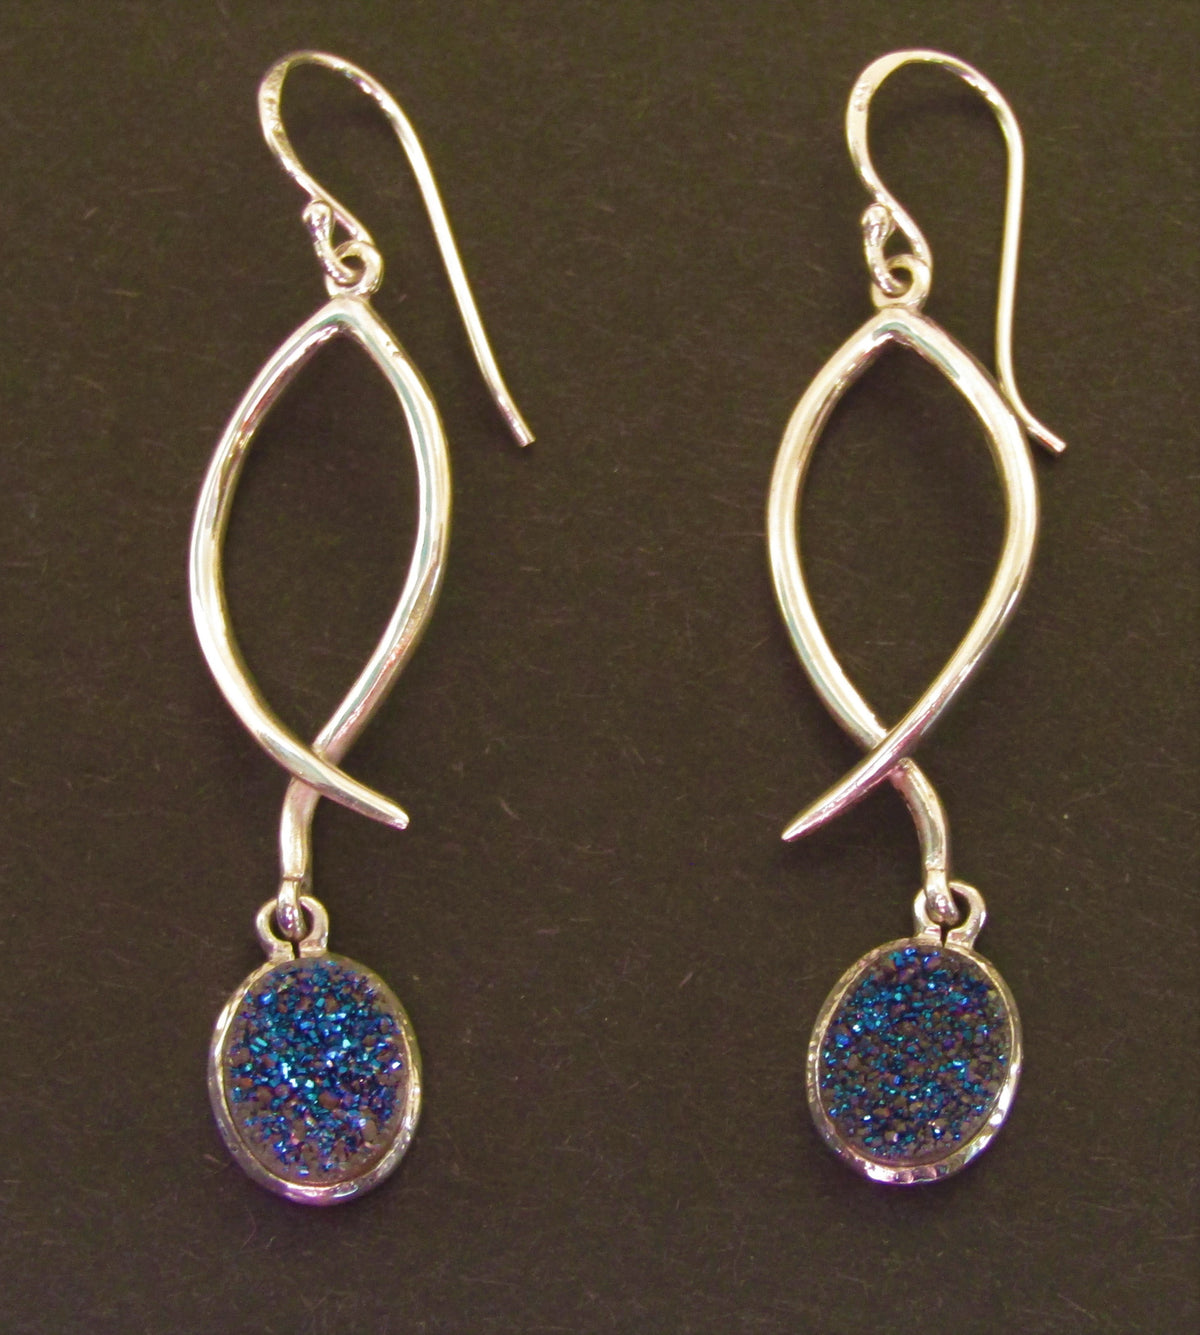 Lupin Earrings with Blue Druzy Stone made by Madeleine Blaine.